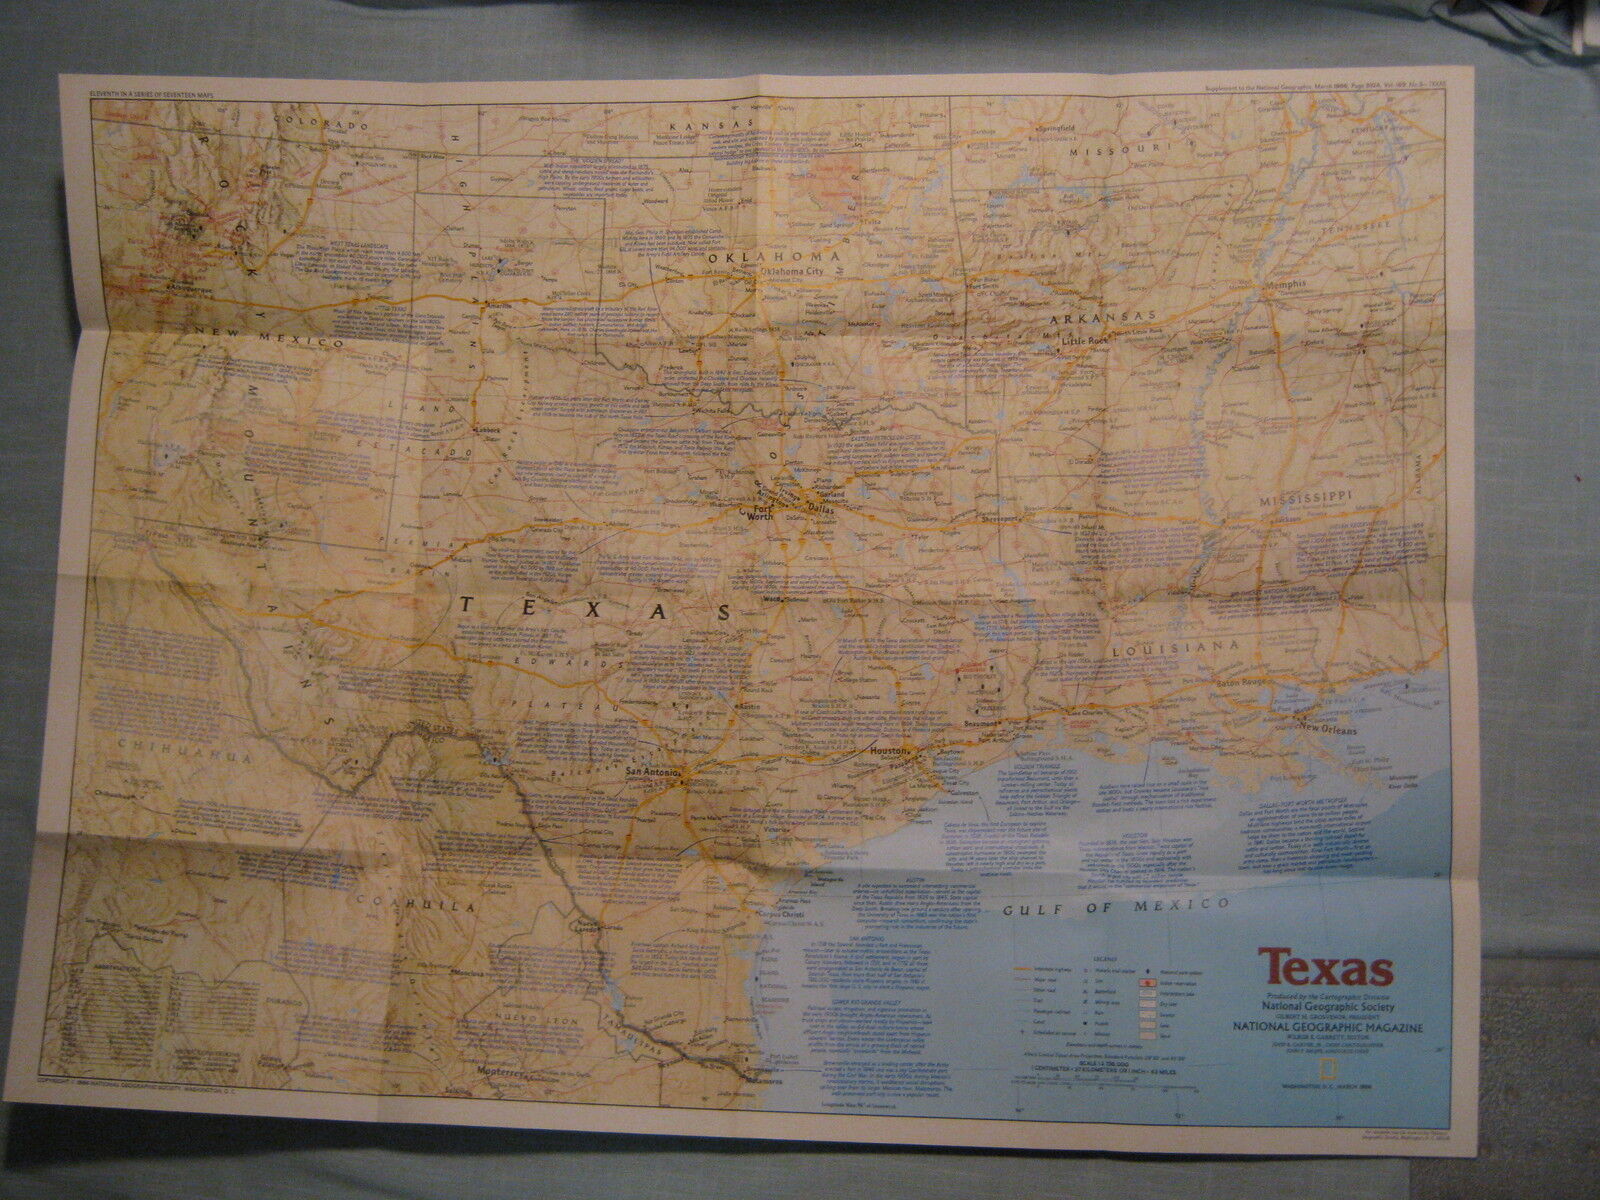 TEXAS MAP THE MAKING OF AMERICA + HISTORY National Geographic March 1986